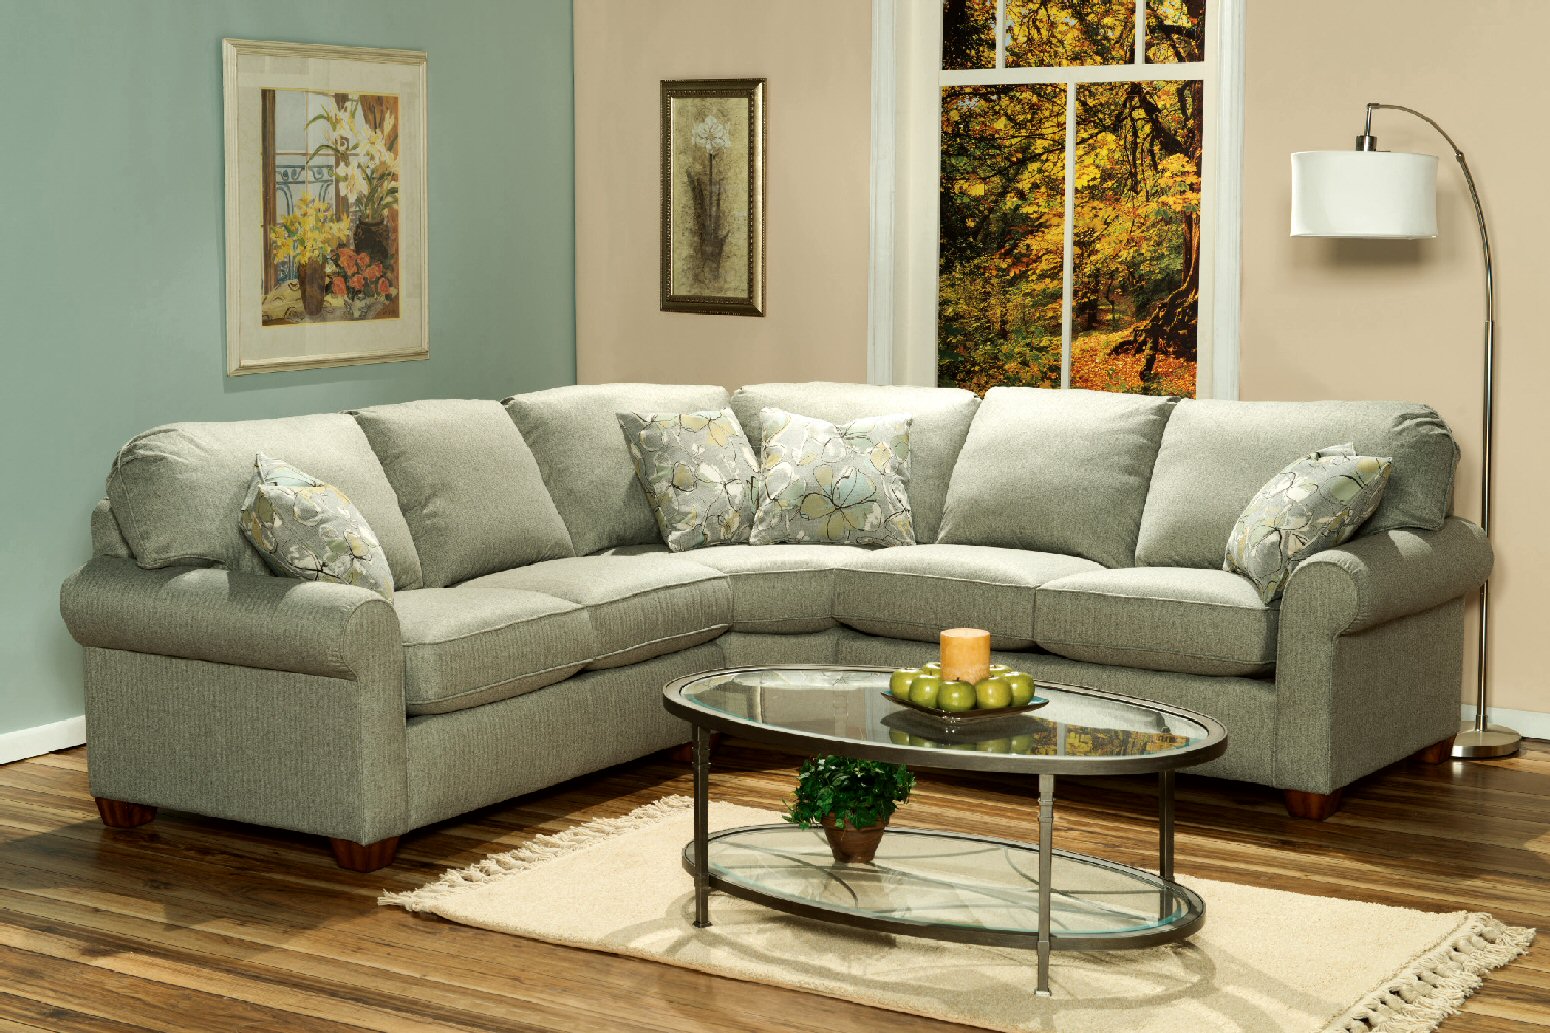 Rupp Furniture Home Page